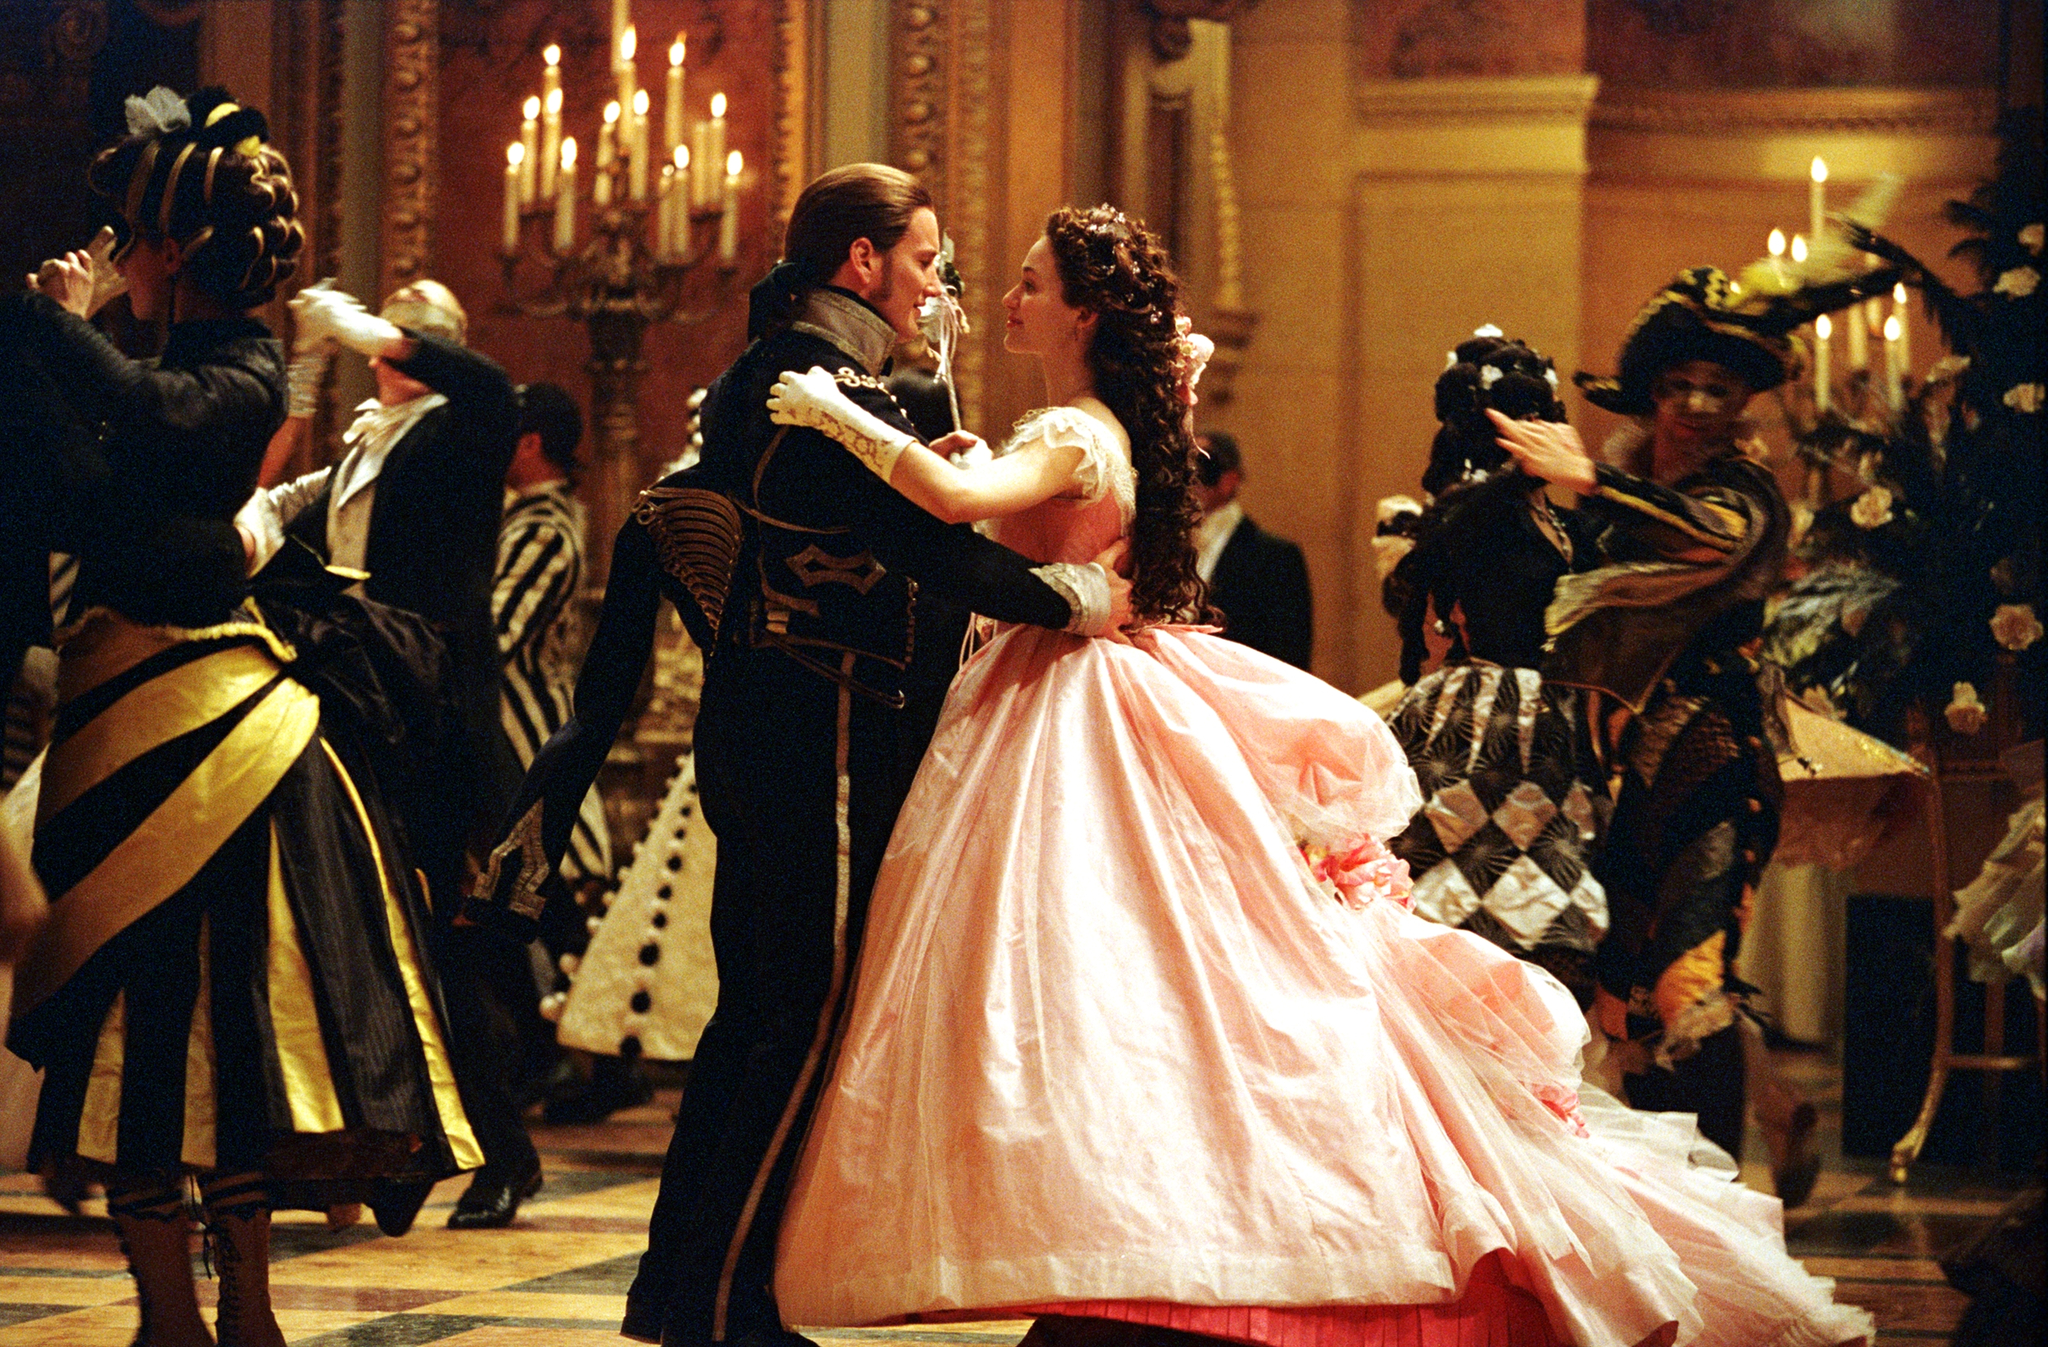 Still of Emmy Rossum and Patrick Wilson in The Phantom of the Opera (2004)